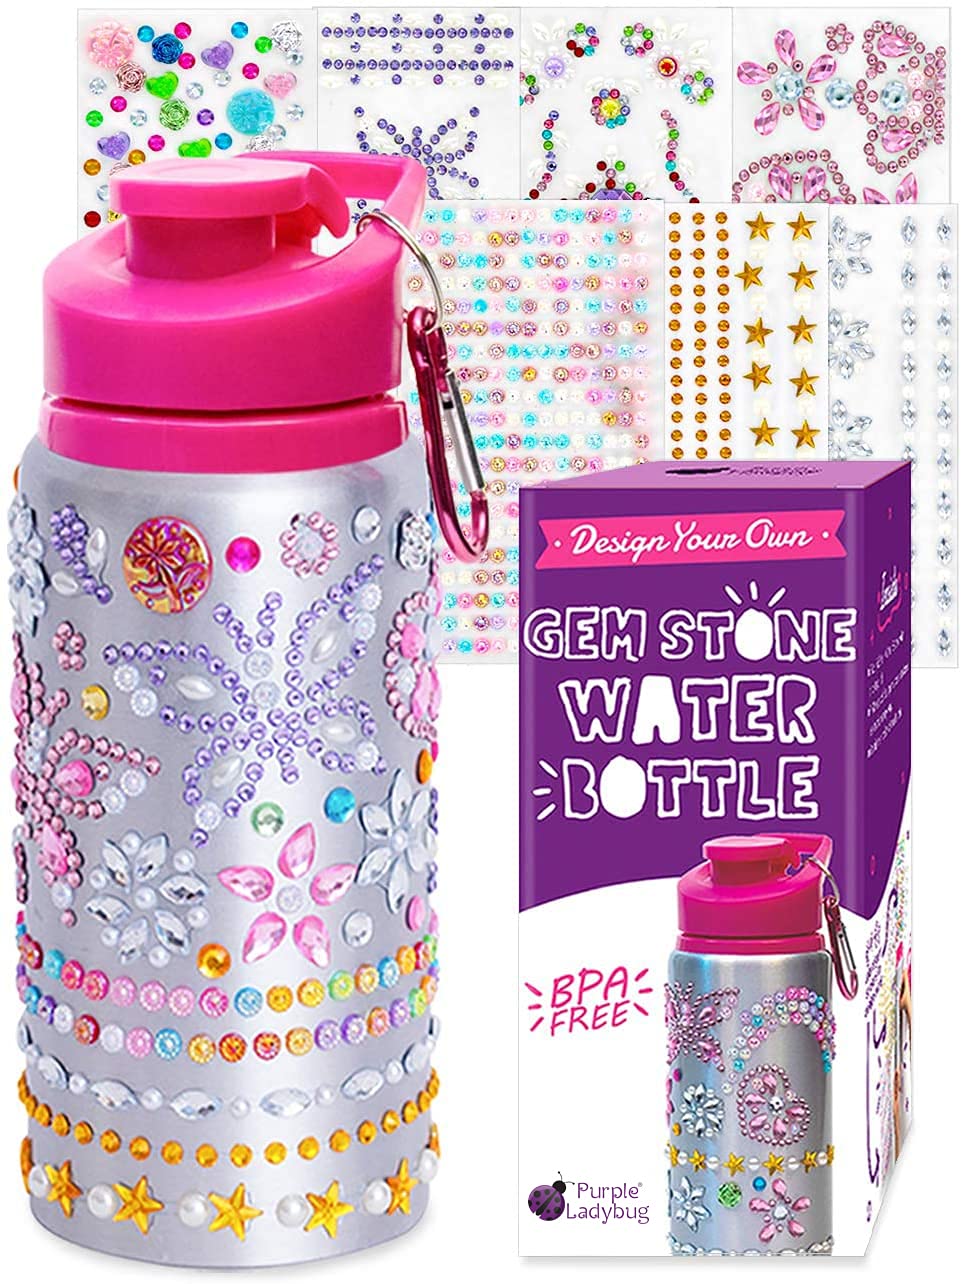 Purple Ladybug Decorate Your Own Water Bottle for Girls with Tons of Rhinestone Glitter Gem Stickers - BPA Free, Kids Water Bottle Craft Kit - Cute Gift for Girl, Fun DIY Arts and Crafts Activity